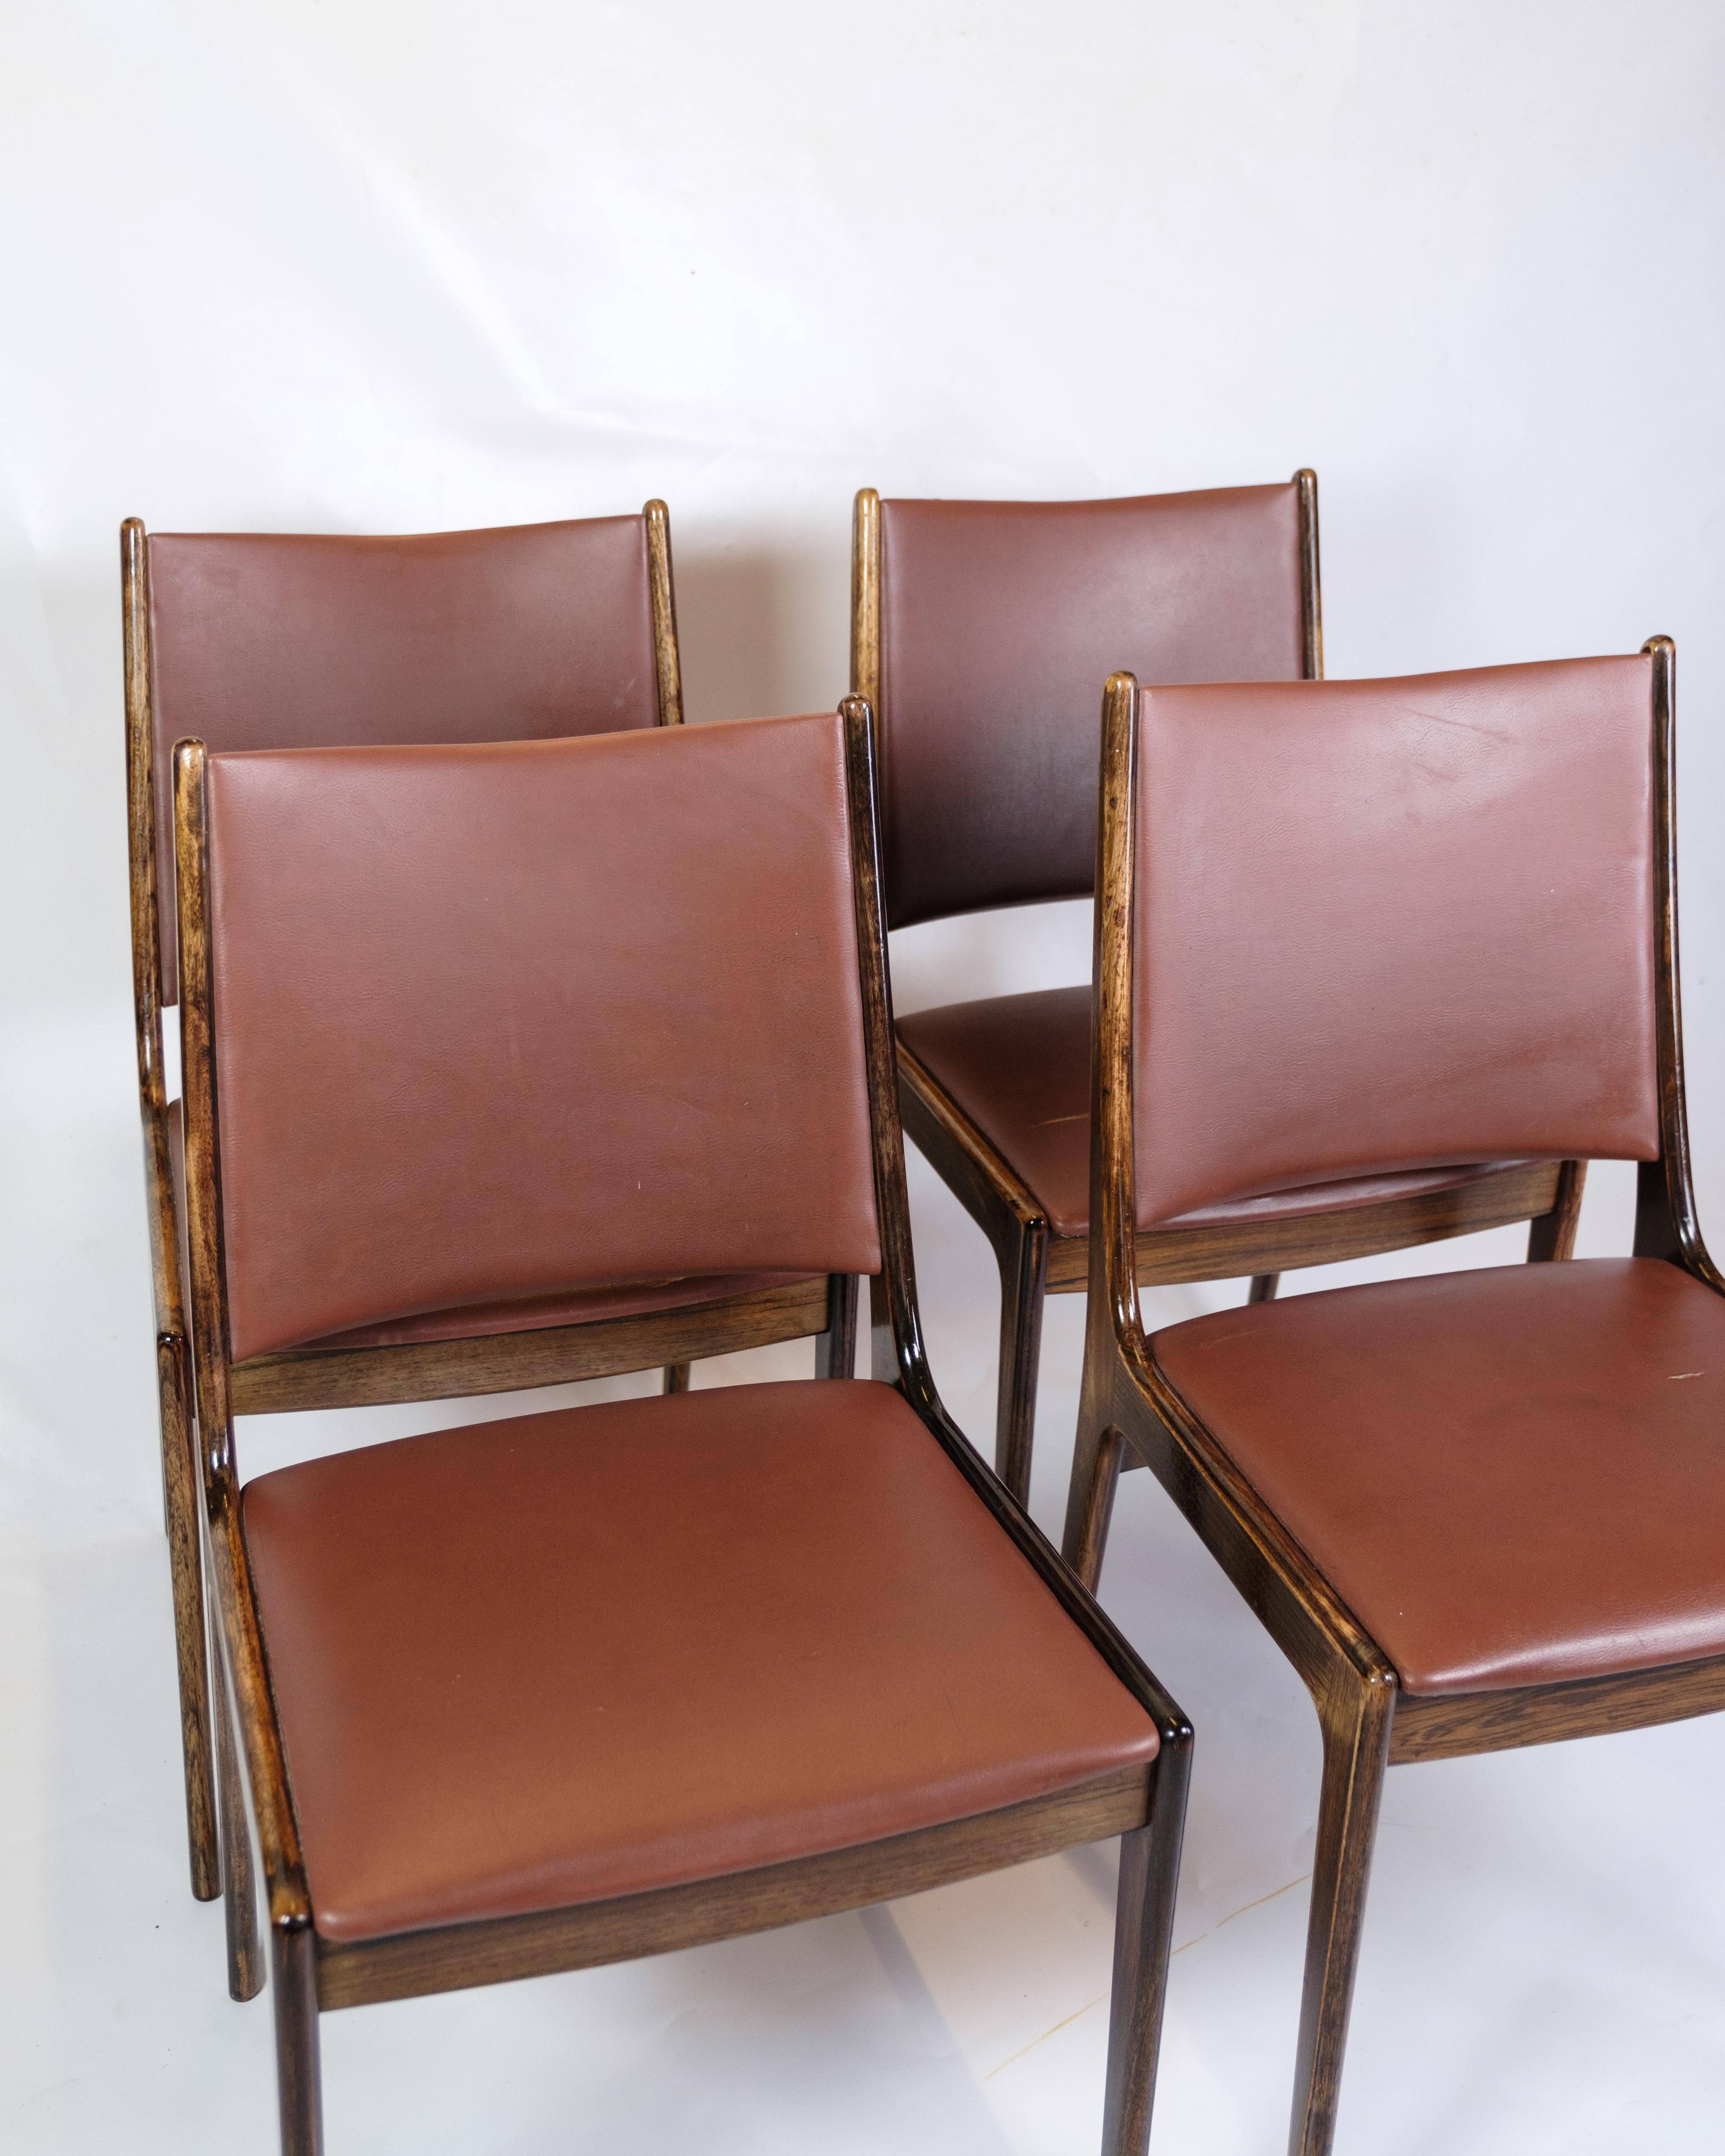 This set of four dining table chairs combines timeless elegance with high functionality. Made from solid rosewood and upholstered in cognac leather, these chairs offer a comfortable seating experience and a beautiful aesthetic for any dining area.